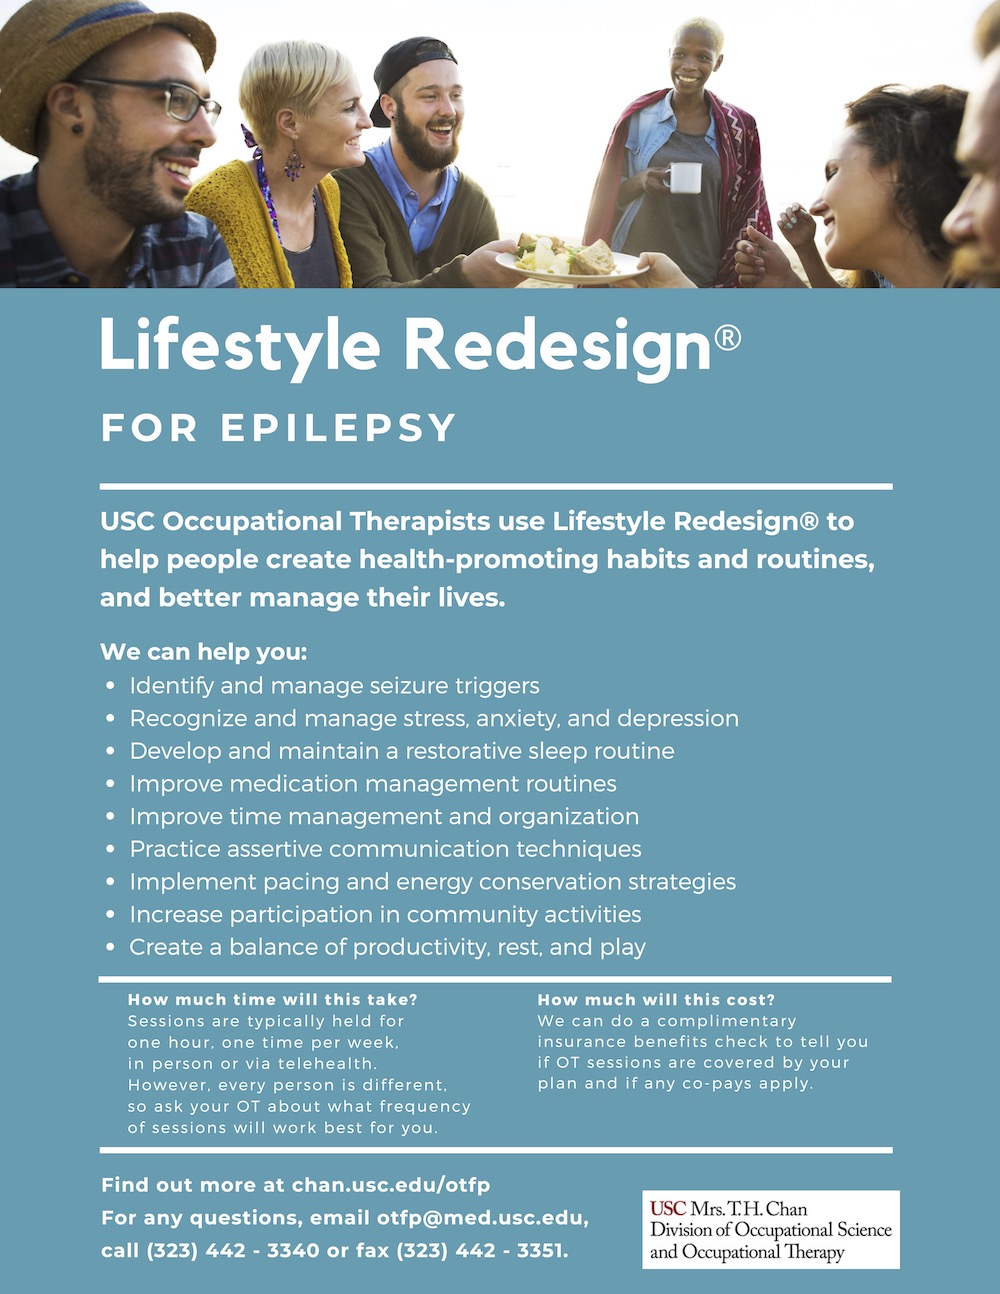 Lifestyle Redesign for Epilepsy